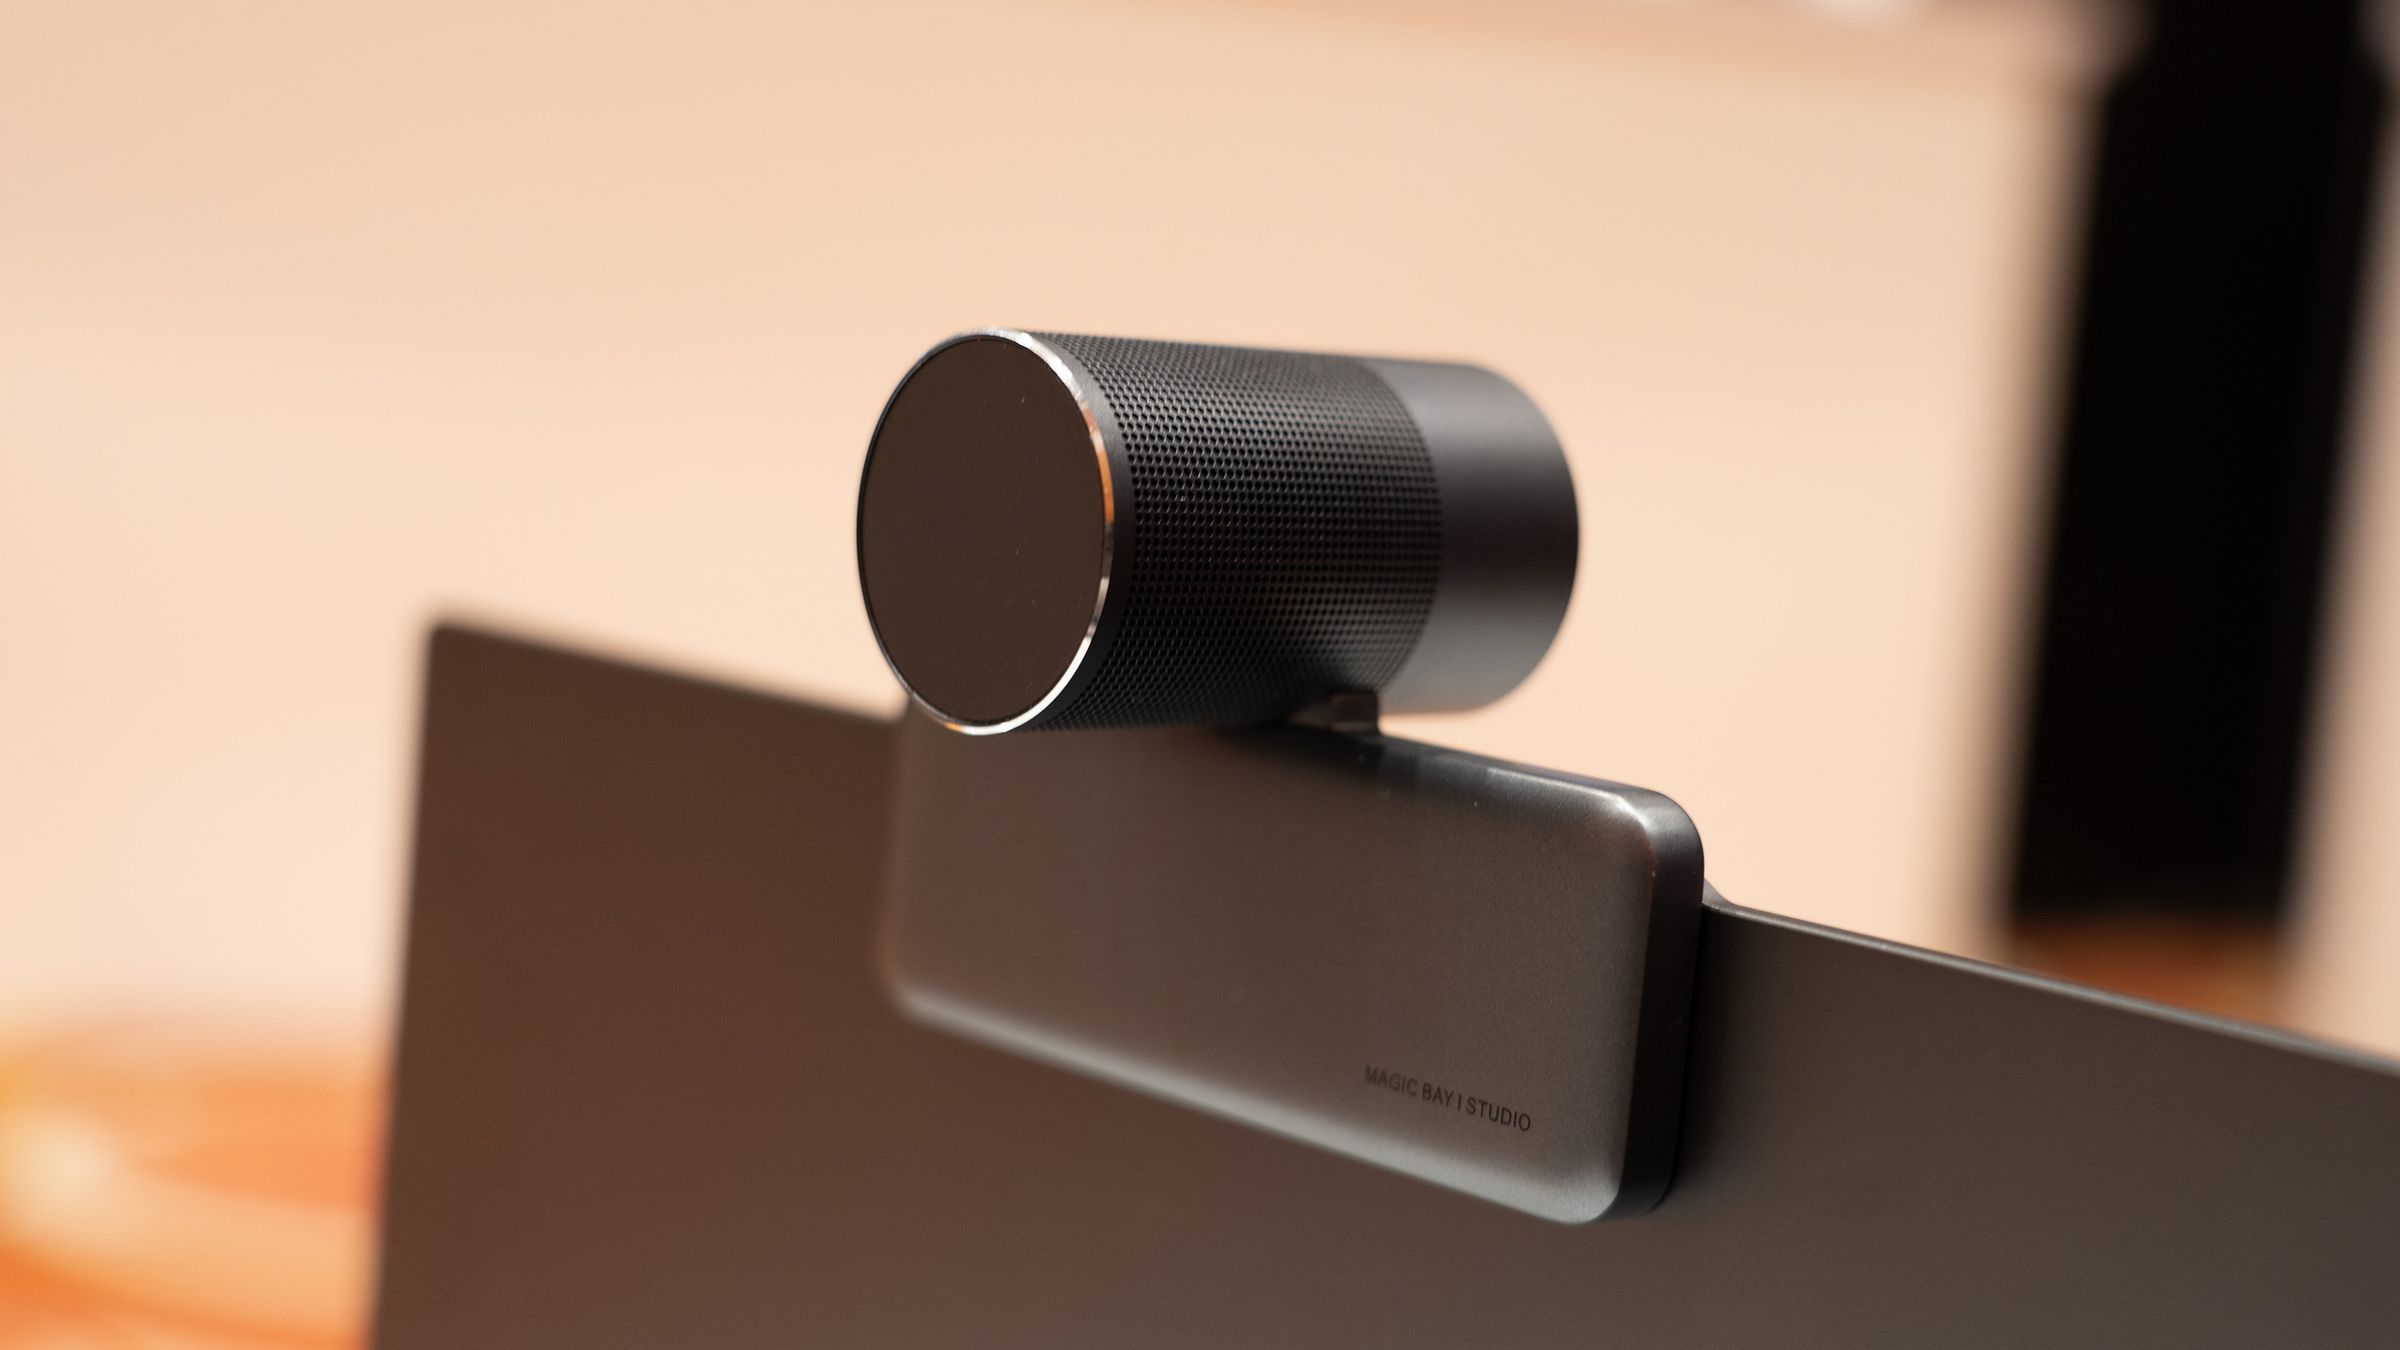 An image of the rear of a 4K webcam attached to the top of a laptop.